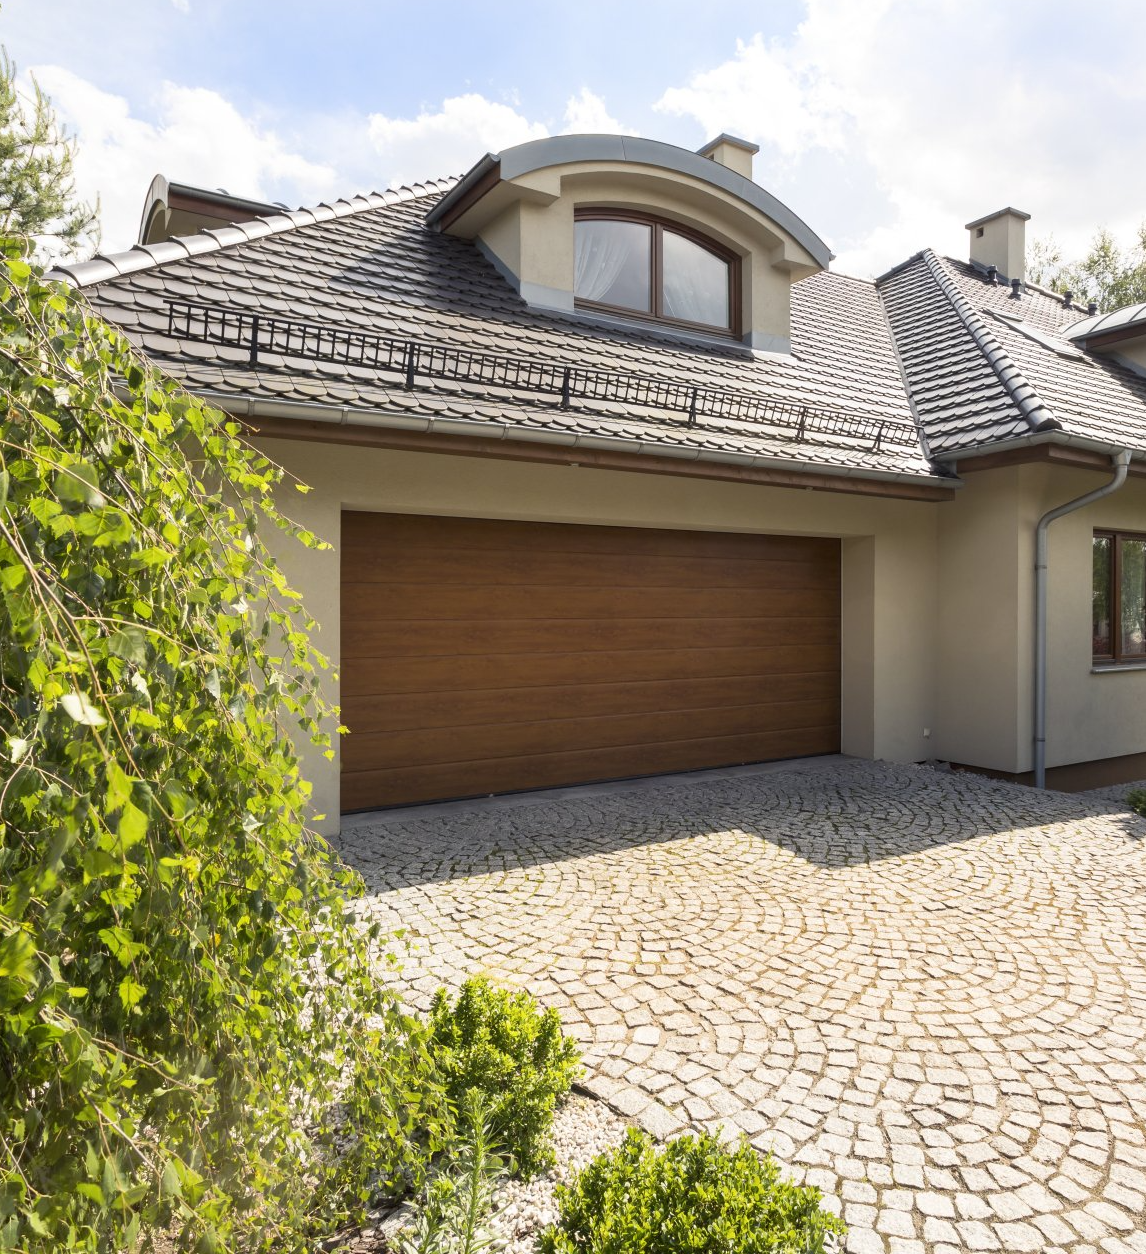 detached house with cobblestone driveway